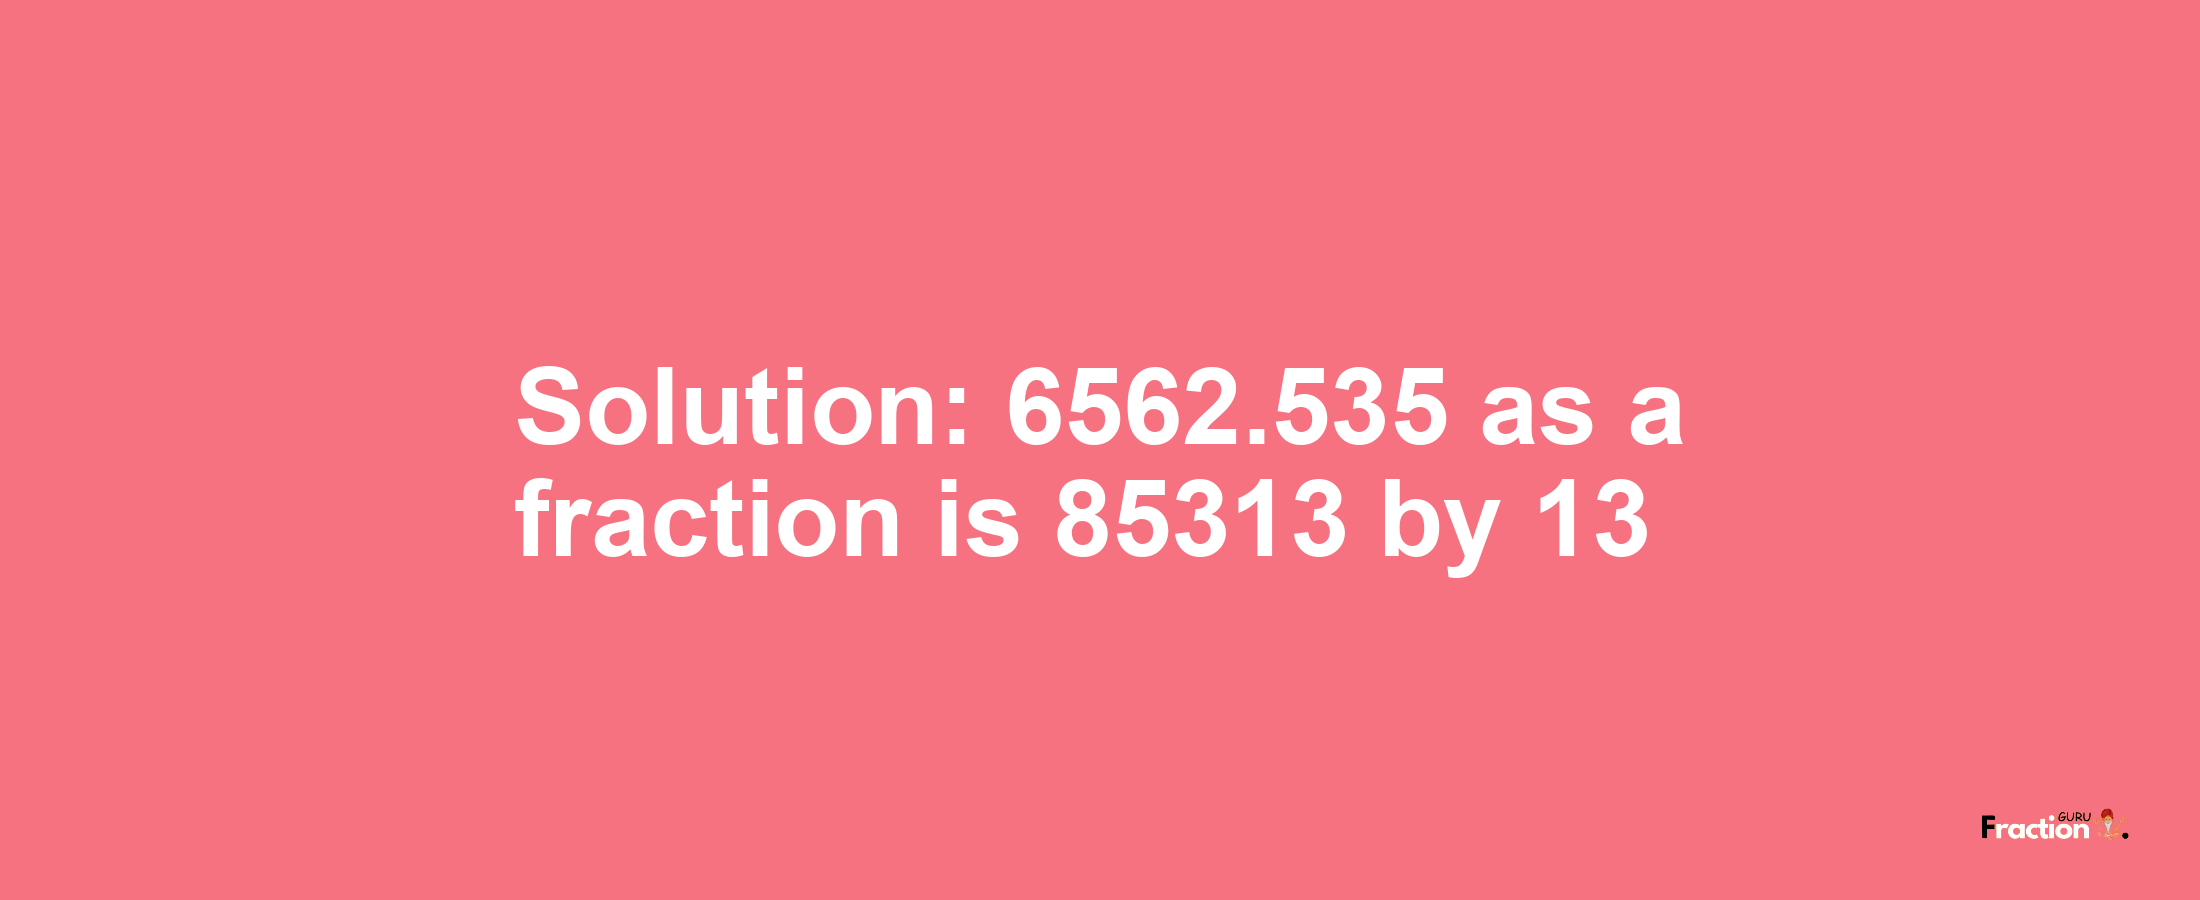 Solution:6562.535 as a fraction is 85313/13